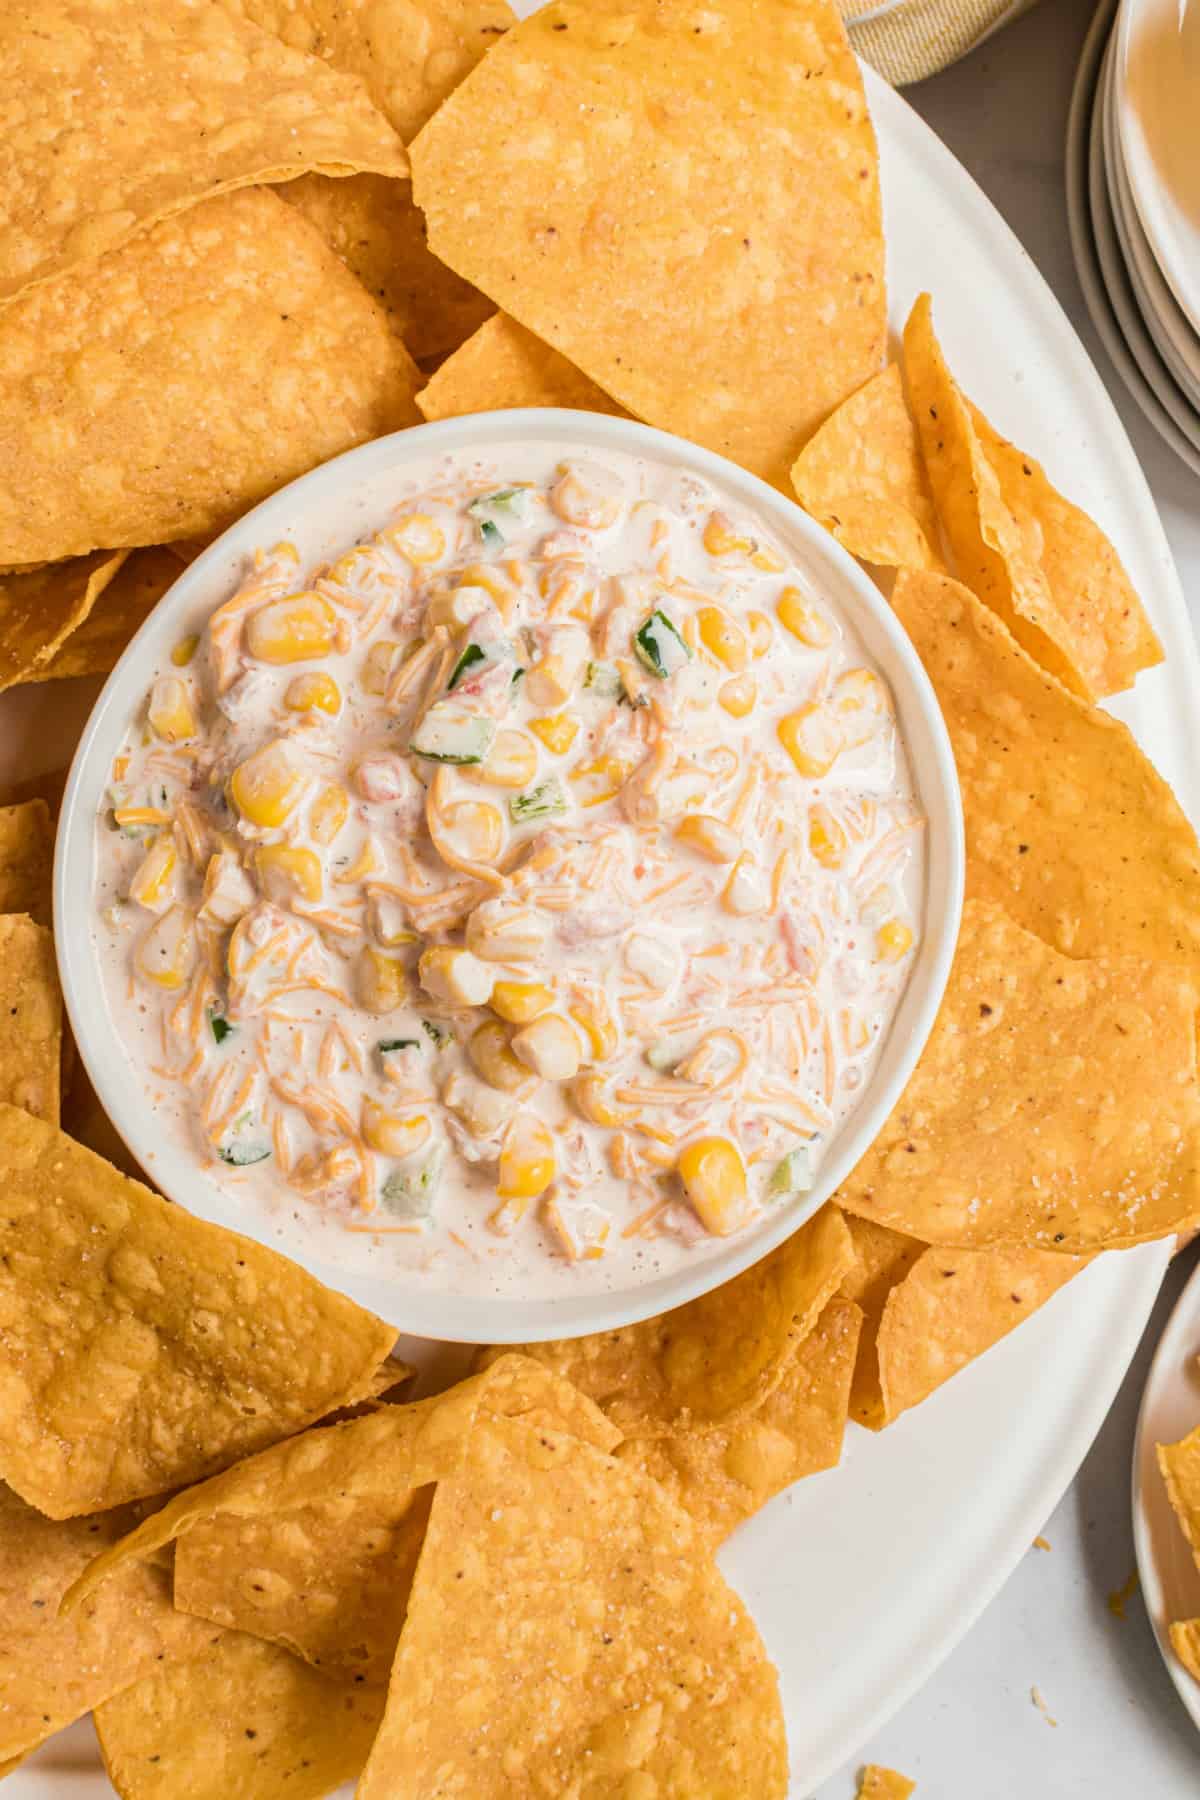 Jalapeno corn dip in a white bowl and a platter of tortilla chips.